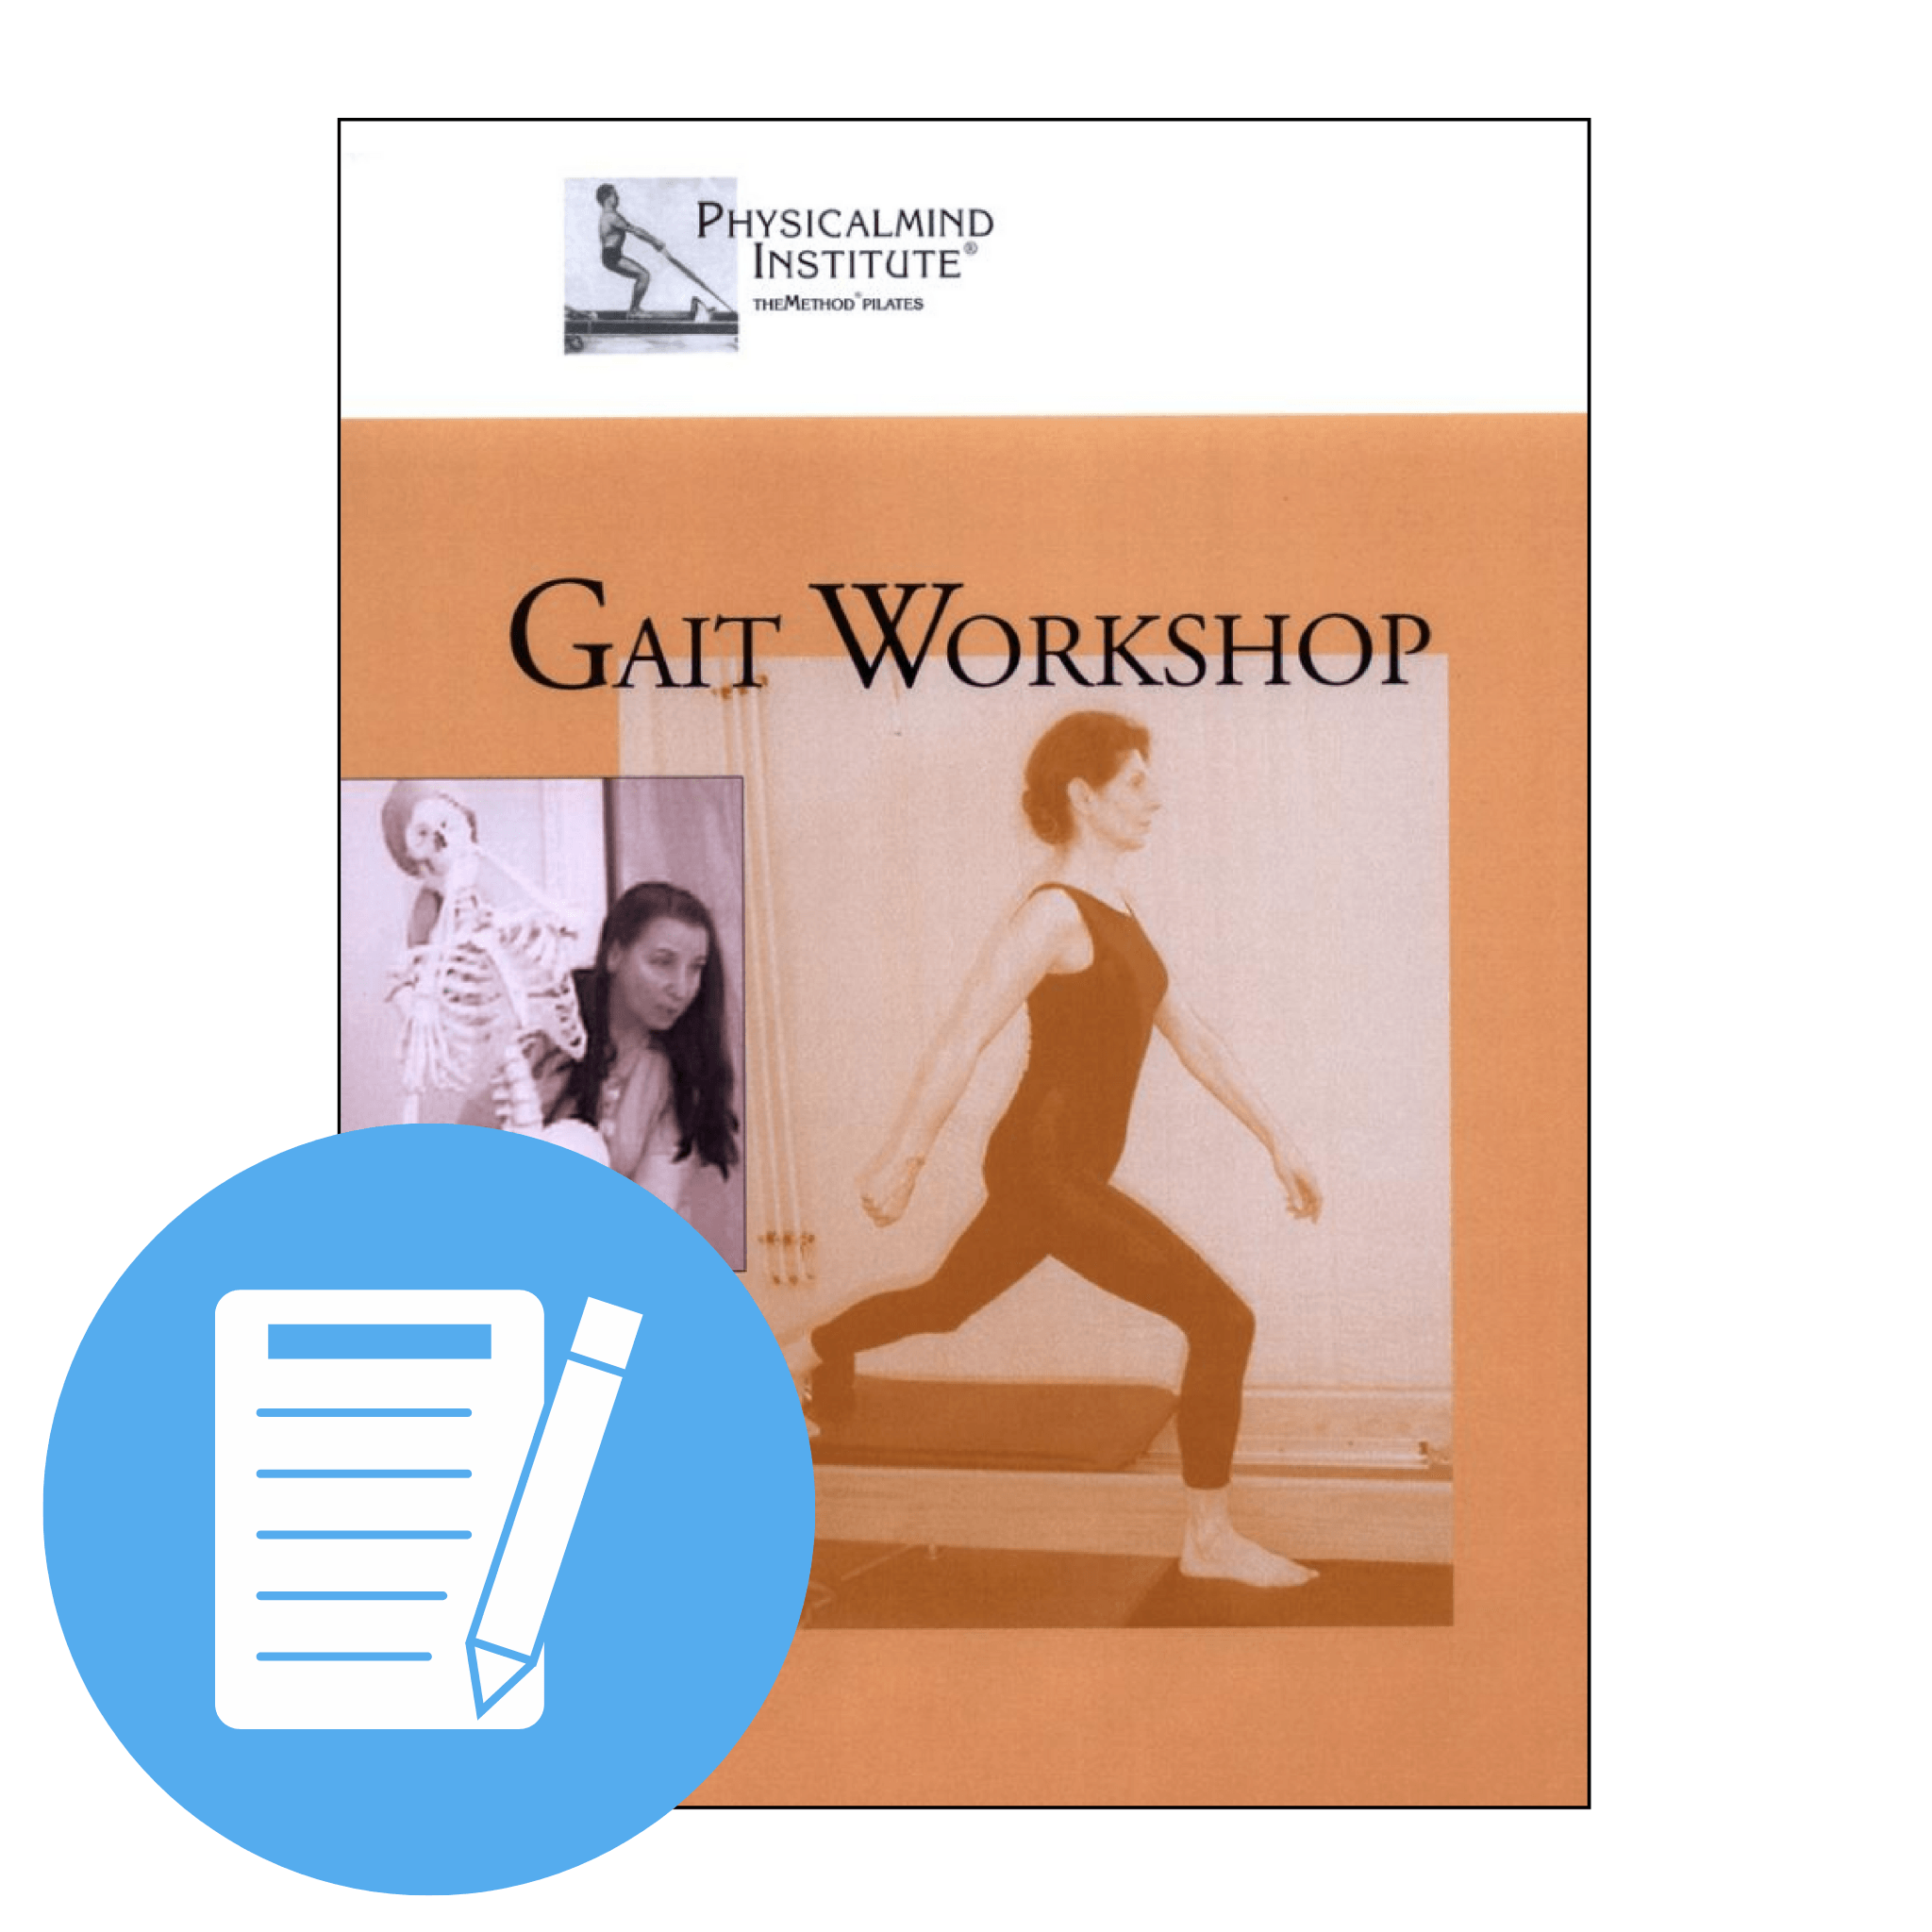 PhysicalMind Institute Pilates Gait Workshop using the Method Pilates exam manual cover art featuring female pilates instructor demonstrating pilates reformer gait technique and a woman using an anatomical skeleton model to demonstrate technique on gait